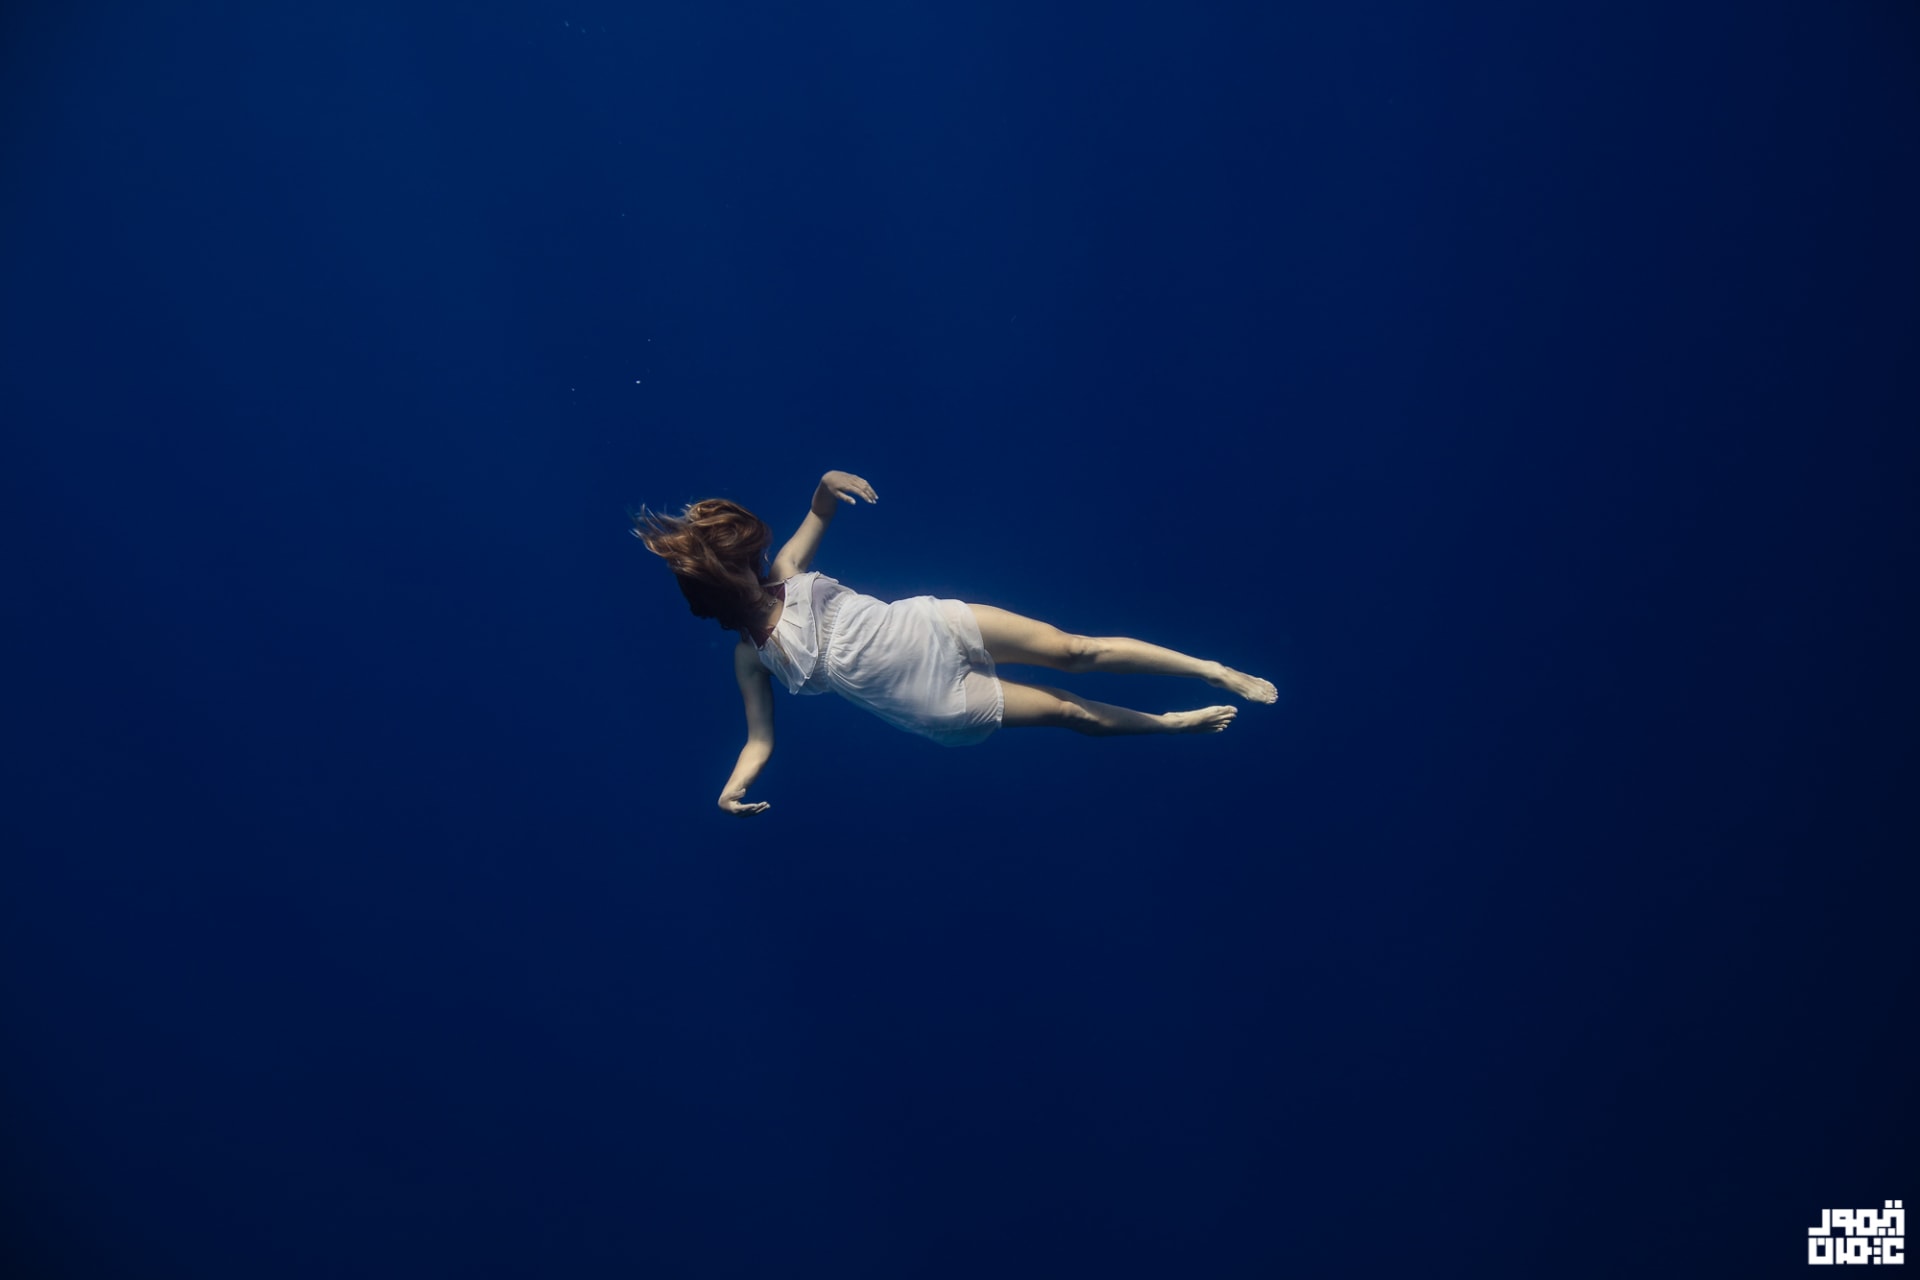 Underwater dancing in Egypt .. an experience "charming" Promotes women's freedom of speech